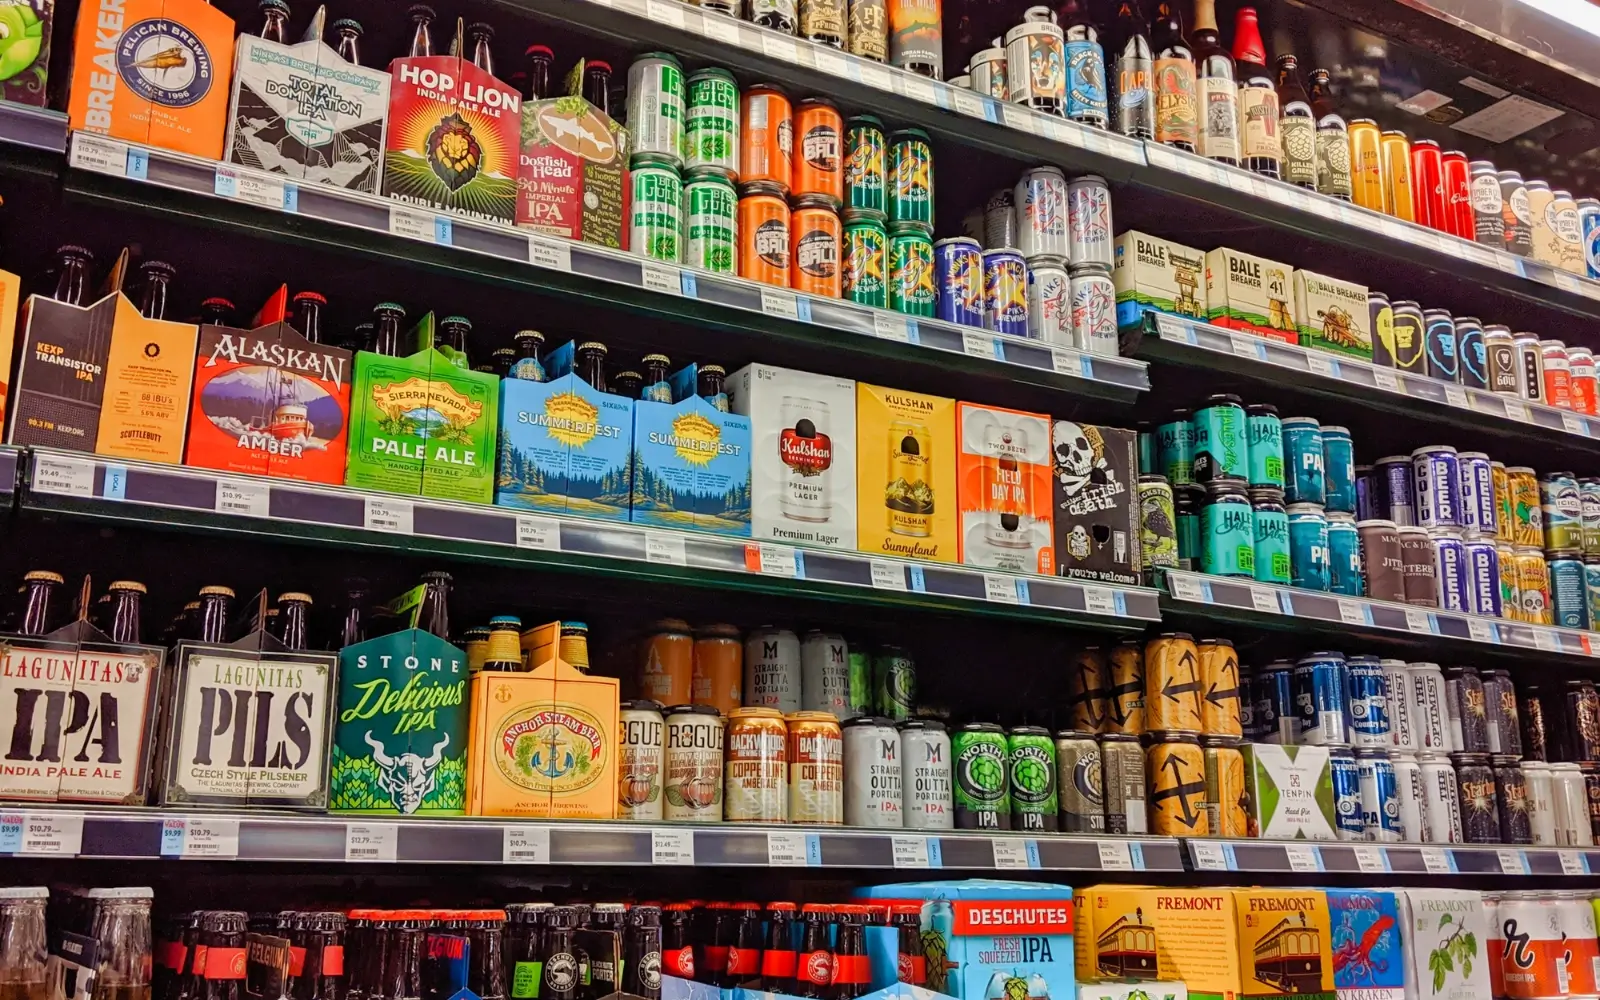 Rows of beers and brewery labels on store shelves